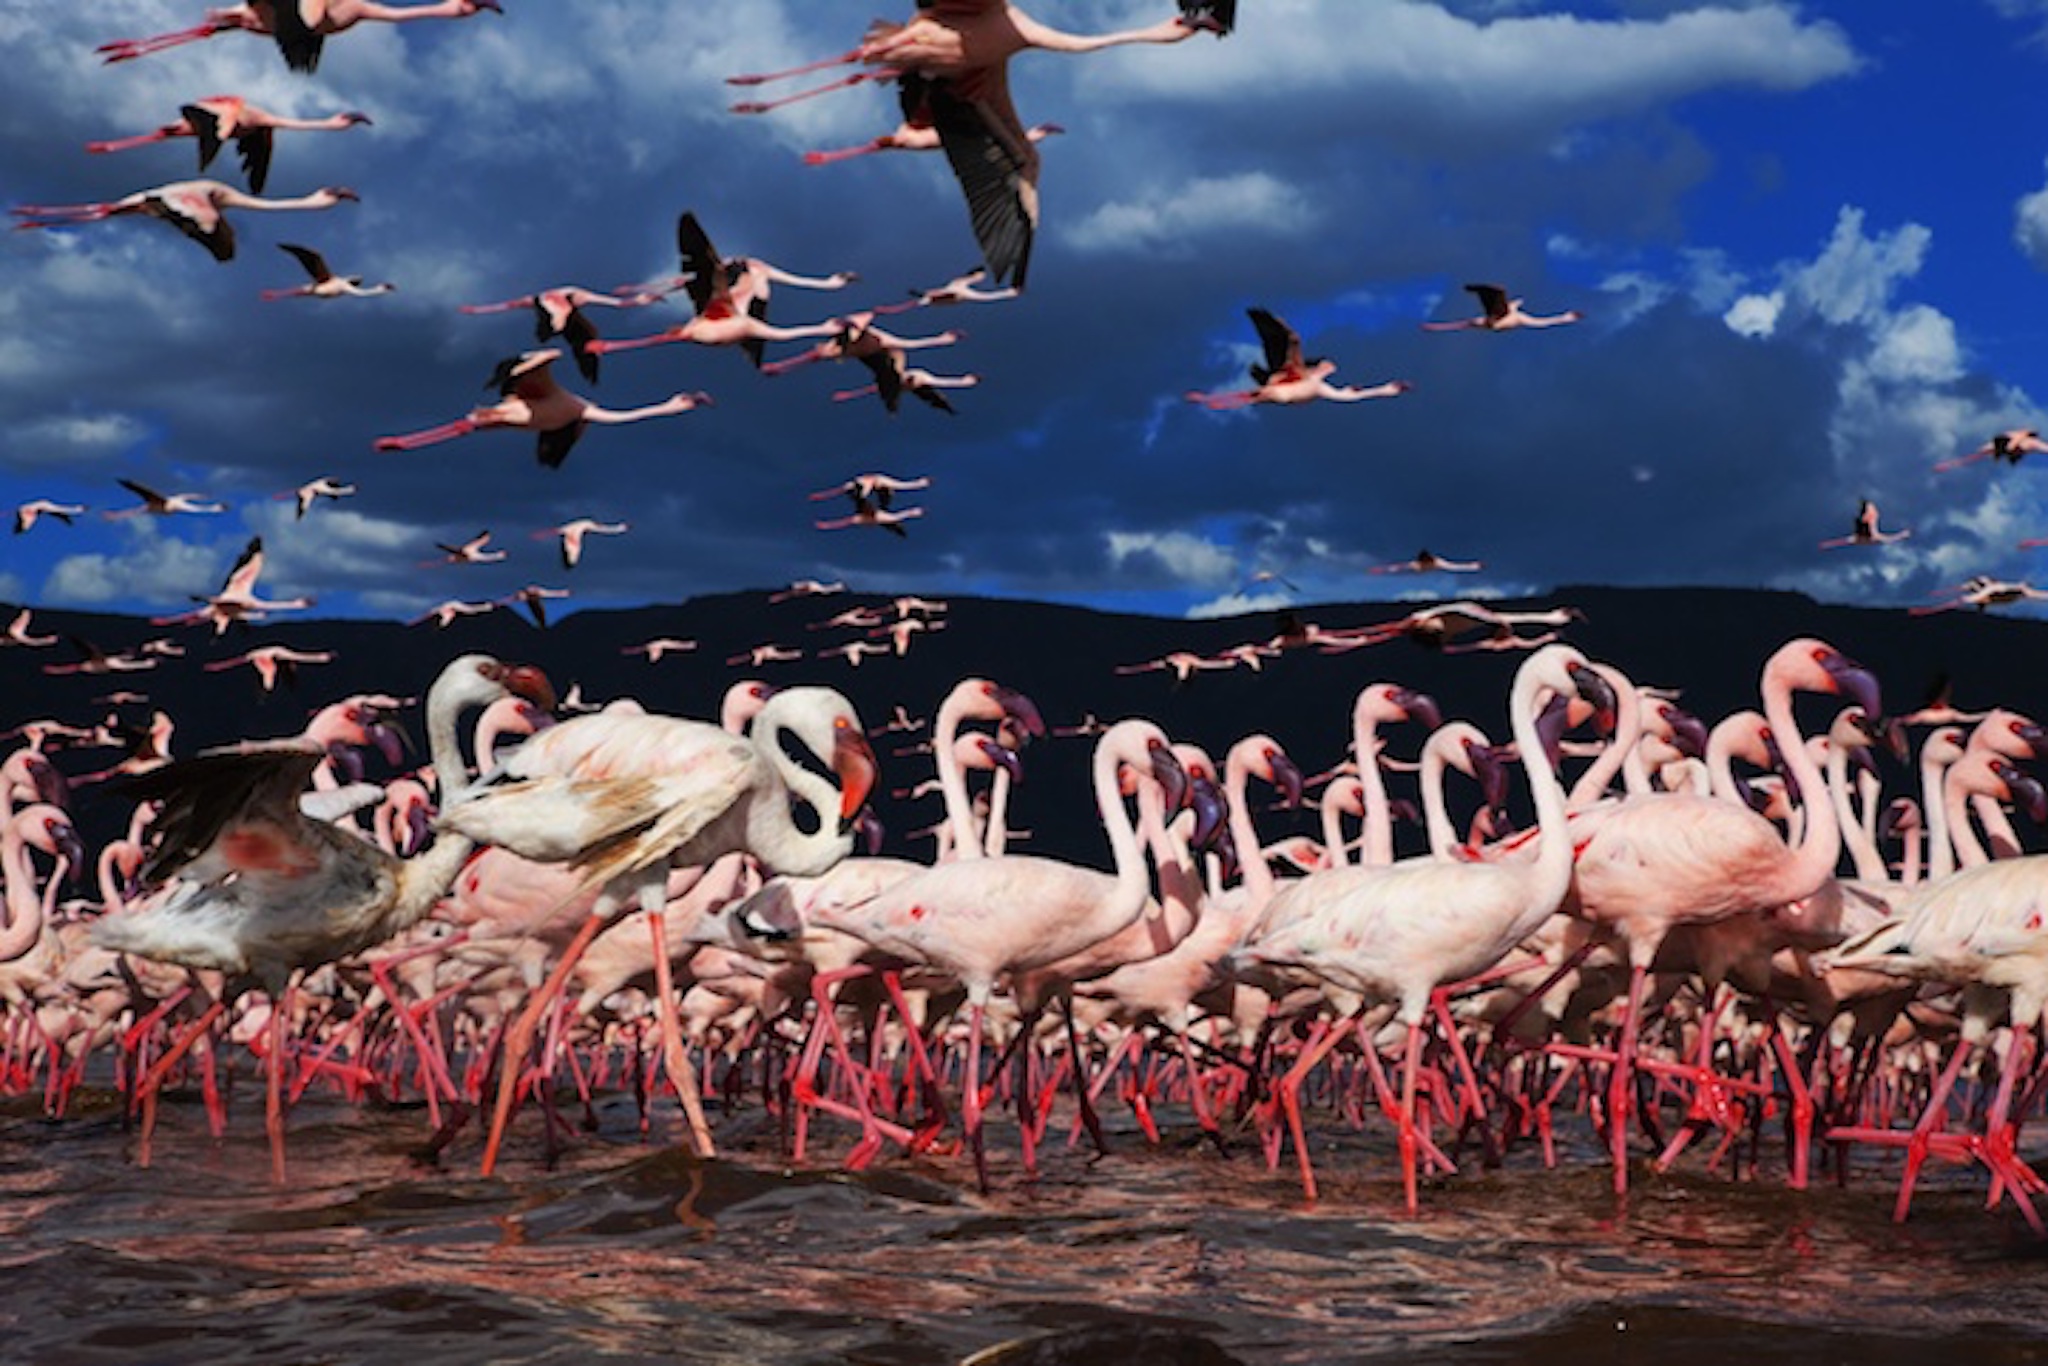 Nature's Top 10 Animal Migration with andBeyond Travel